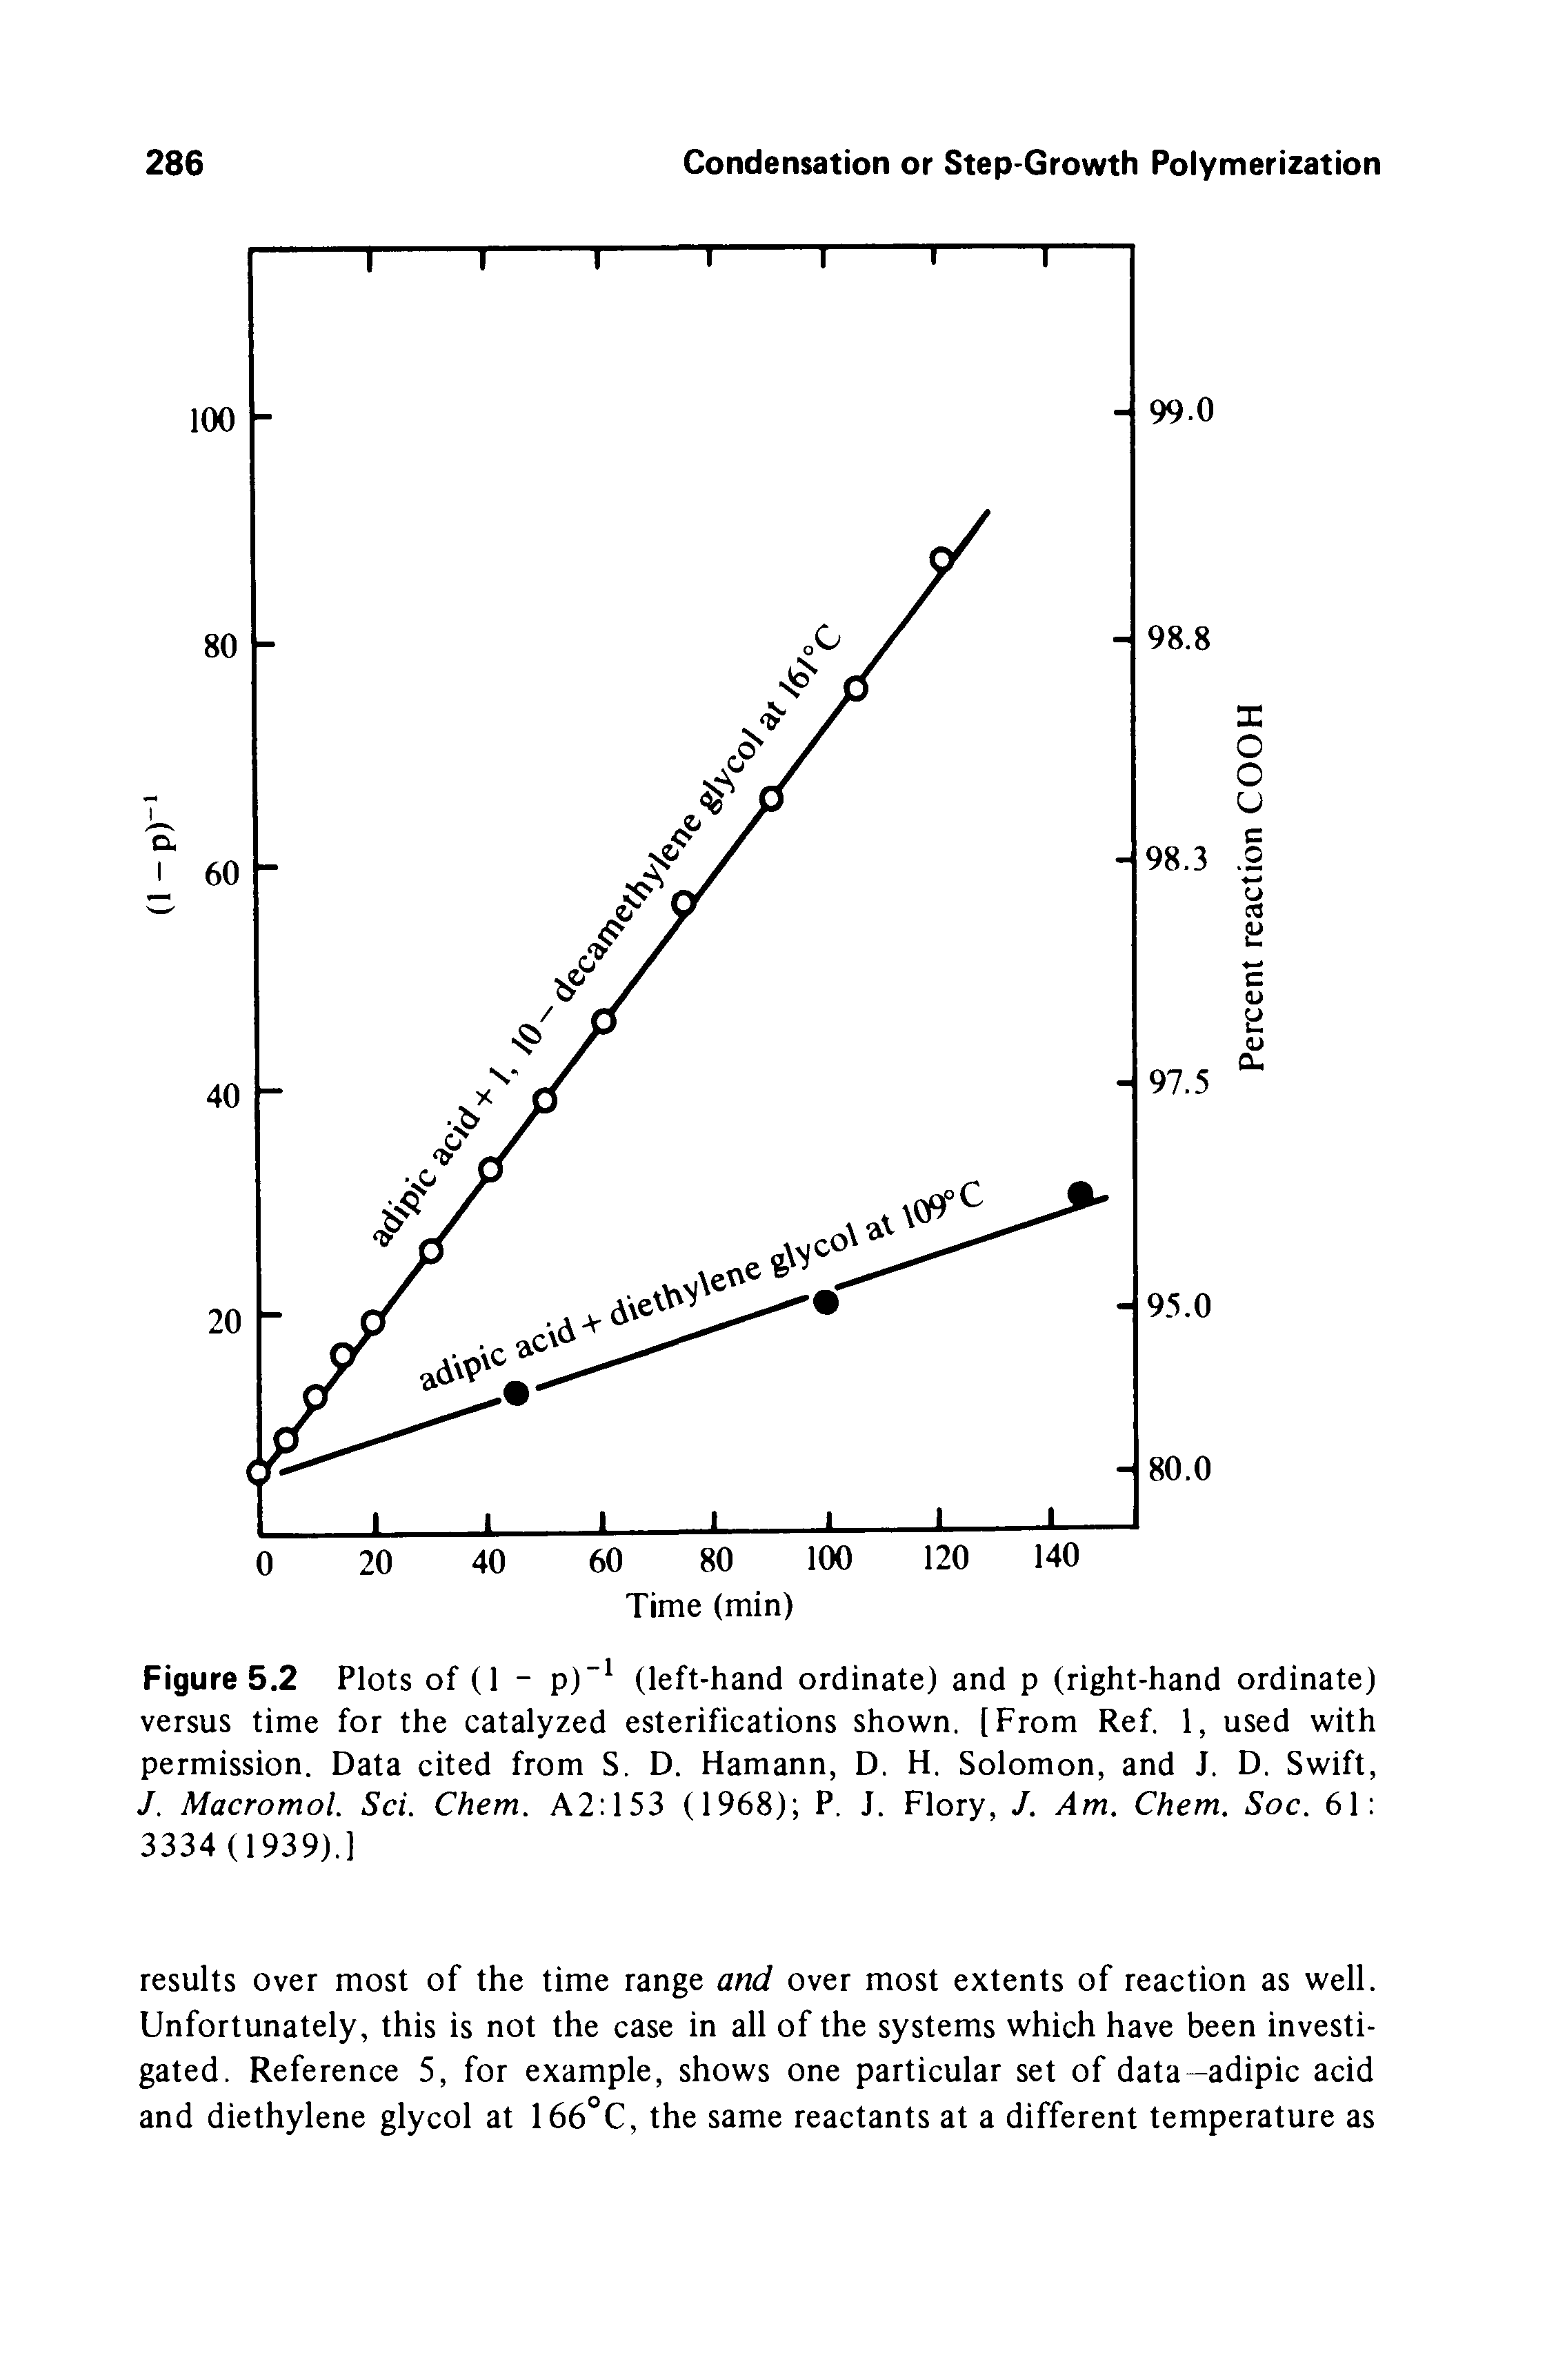 Figure 5.2 Plots of (1 - p)" (left-hand ordinate) and p (right-hand ordinate) versus time for the catalyzed esterifications shown. [From Ref. 1, used with permission. Data cited from S. D. Hamann, D. H. Solomon, and J. D. Swift, J. Macromol. Sci. Chem. A2 153 (1968) P. J. Flory, J. Am. Chem. Soc. 61 3334 (1939).]...